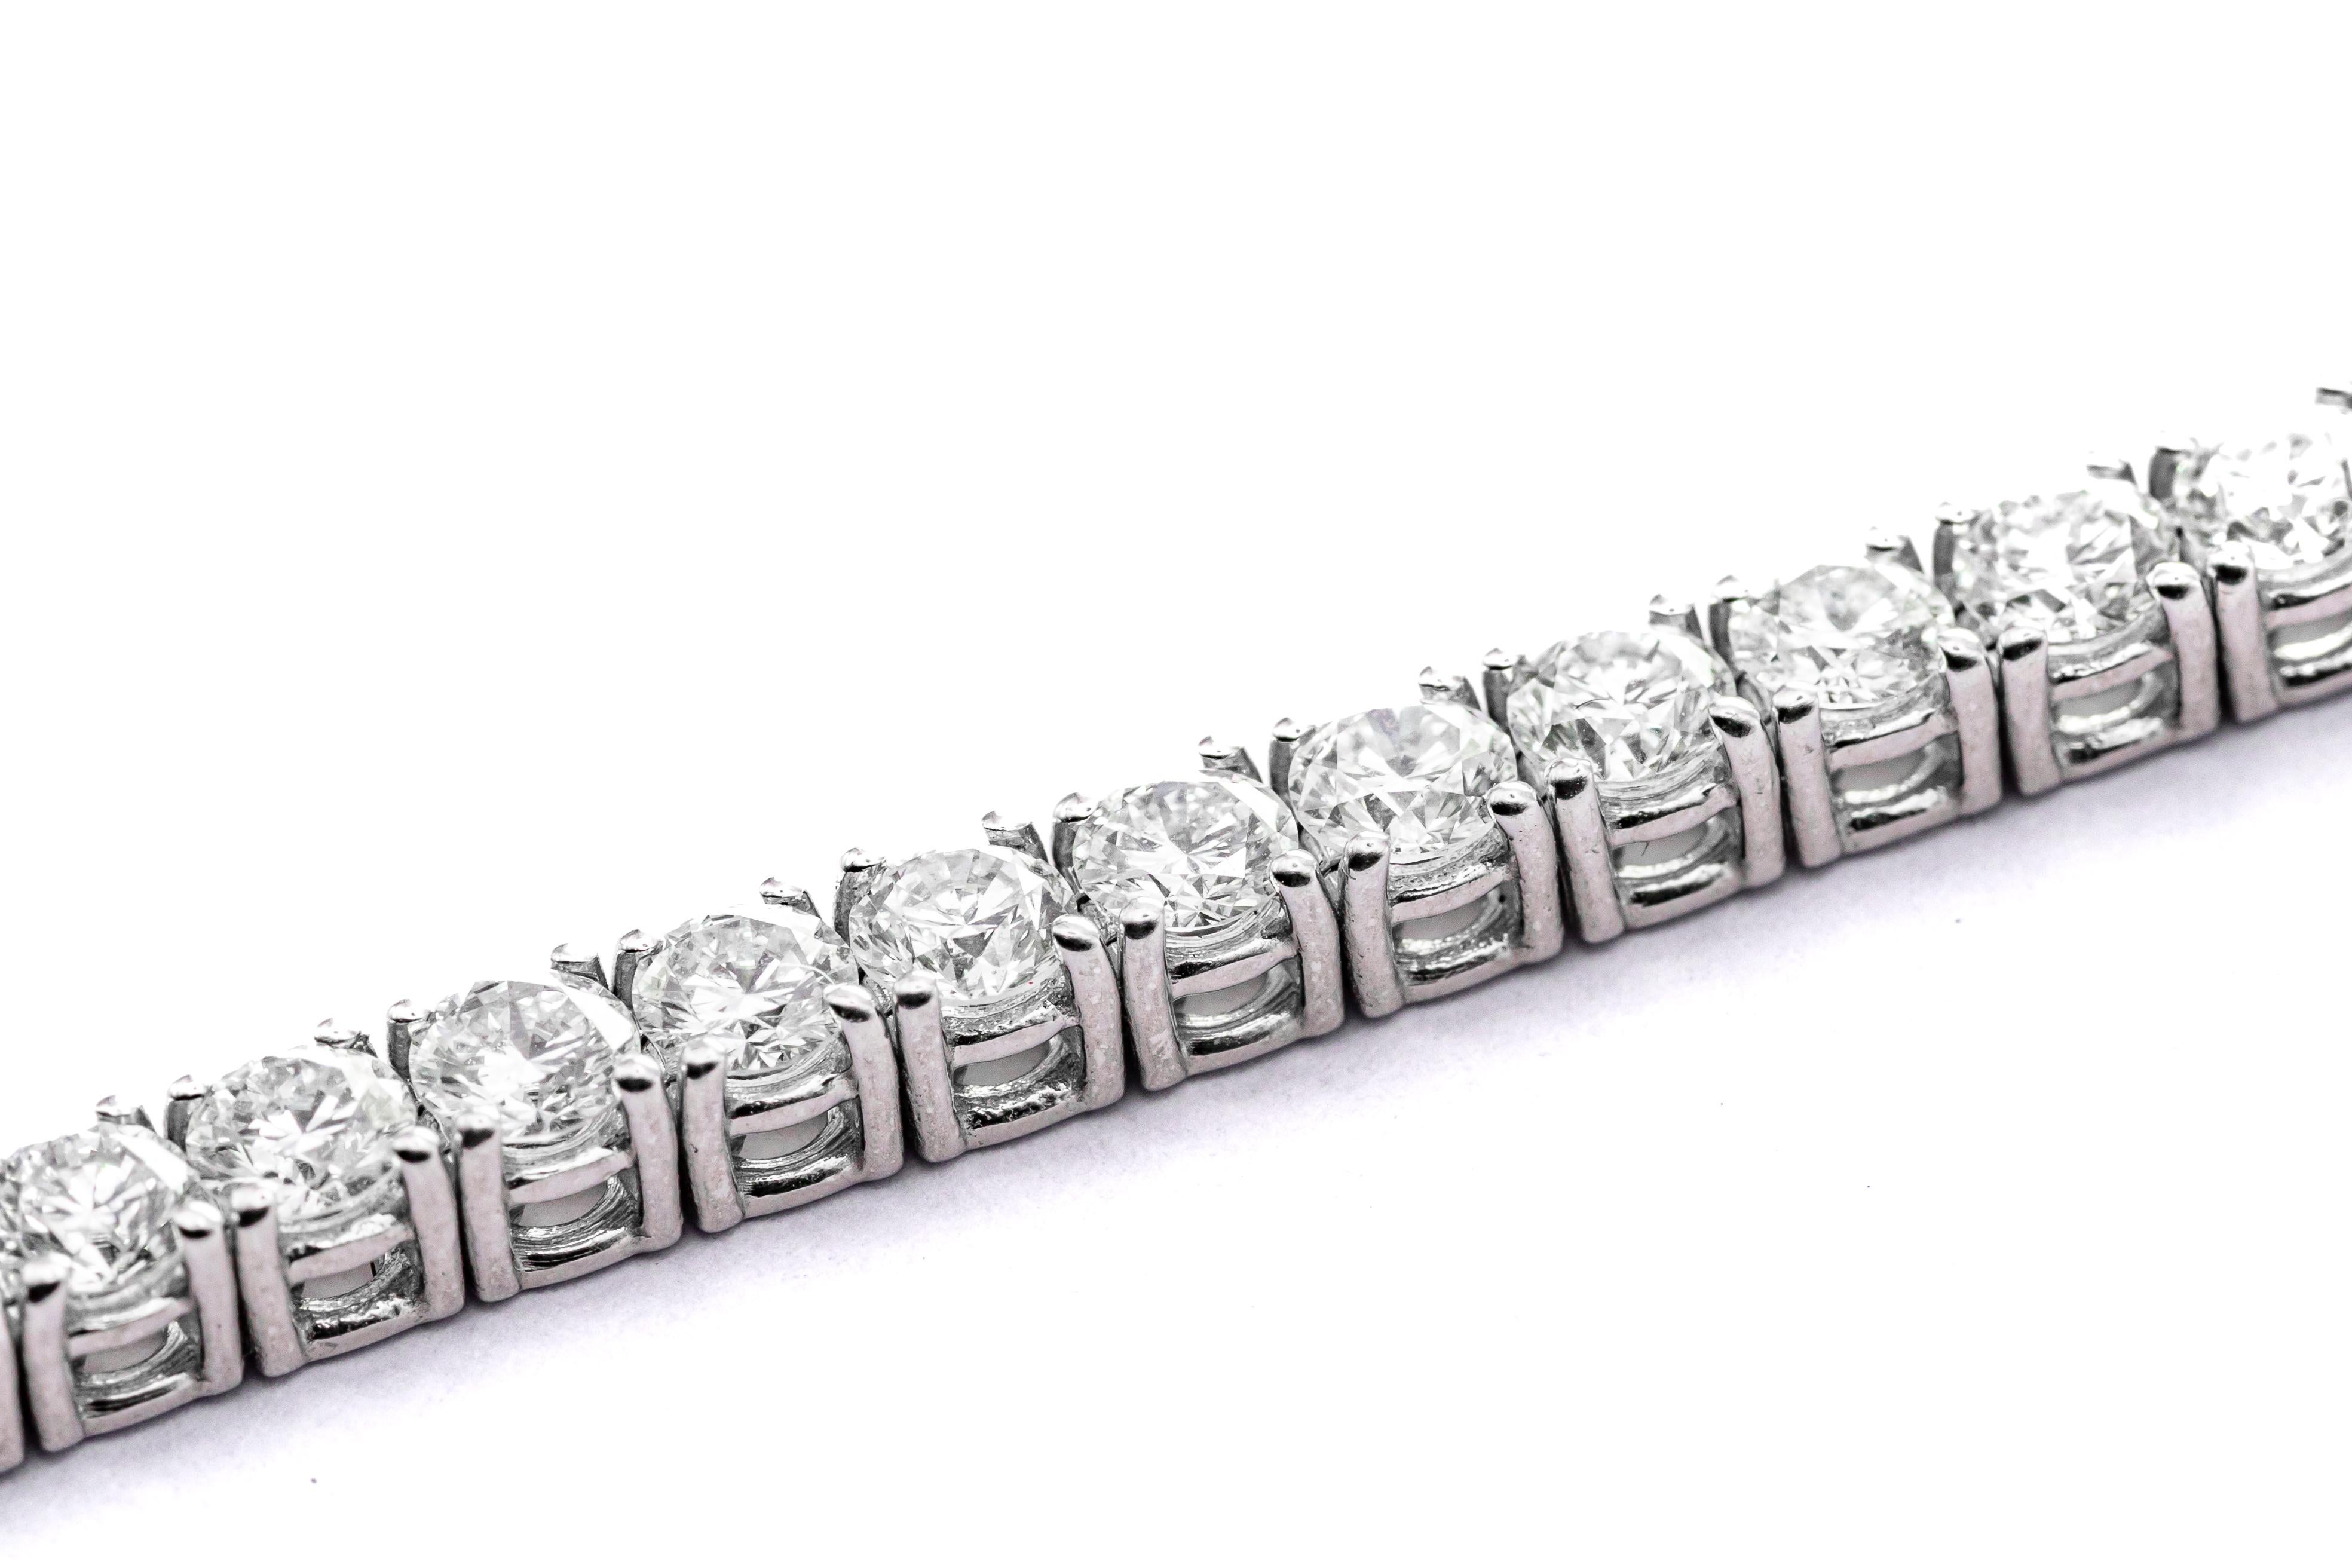 Magnificent and bright VS G color diamond tennis bracelet in 18 carat white gold. diamonds carat 6,09 total stones 55 the lenght is 17,5 centimeters . the bracelet weight is 13,69 grams
Simplicity at it's best, one of our most sold item.
any item of